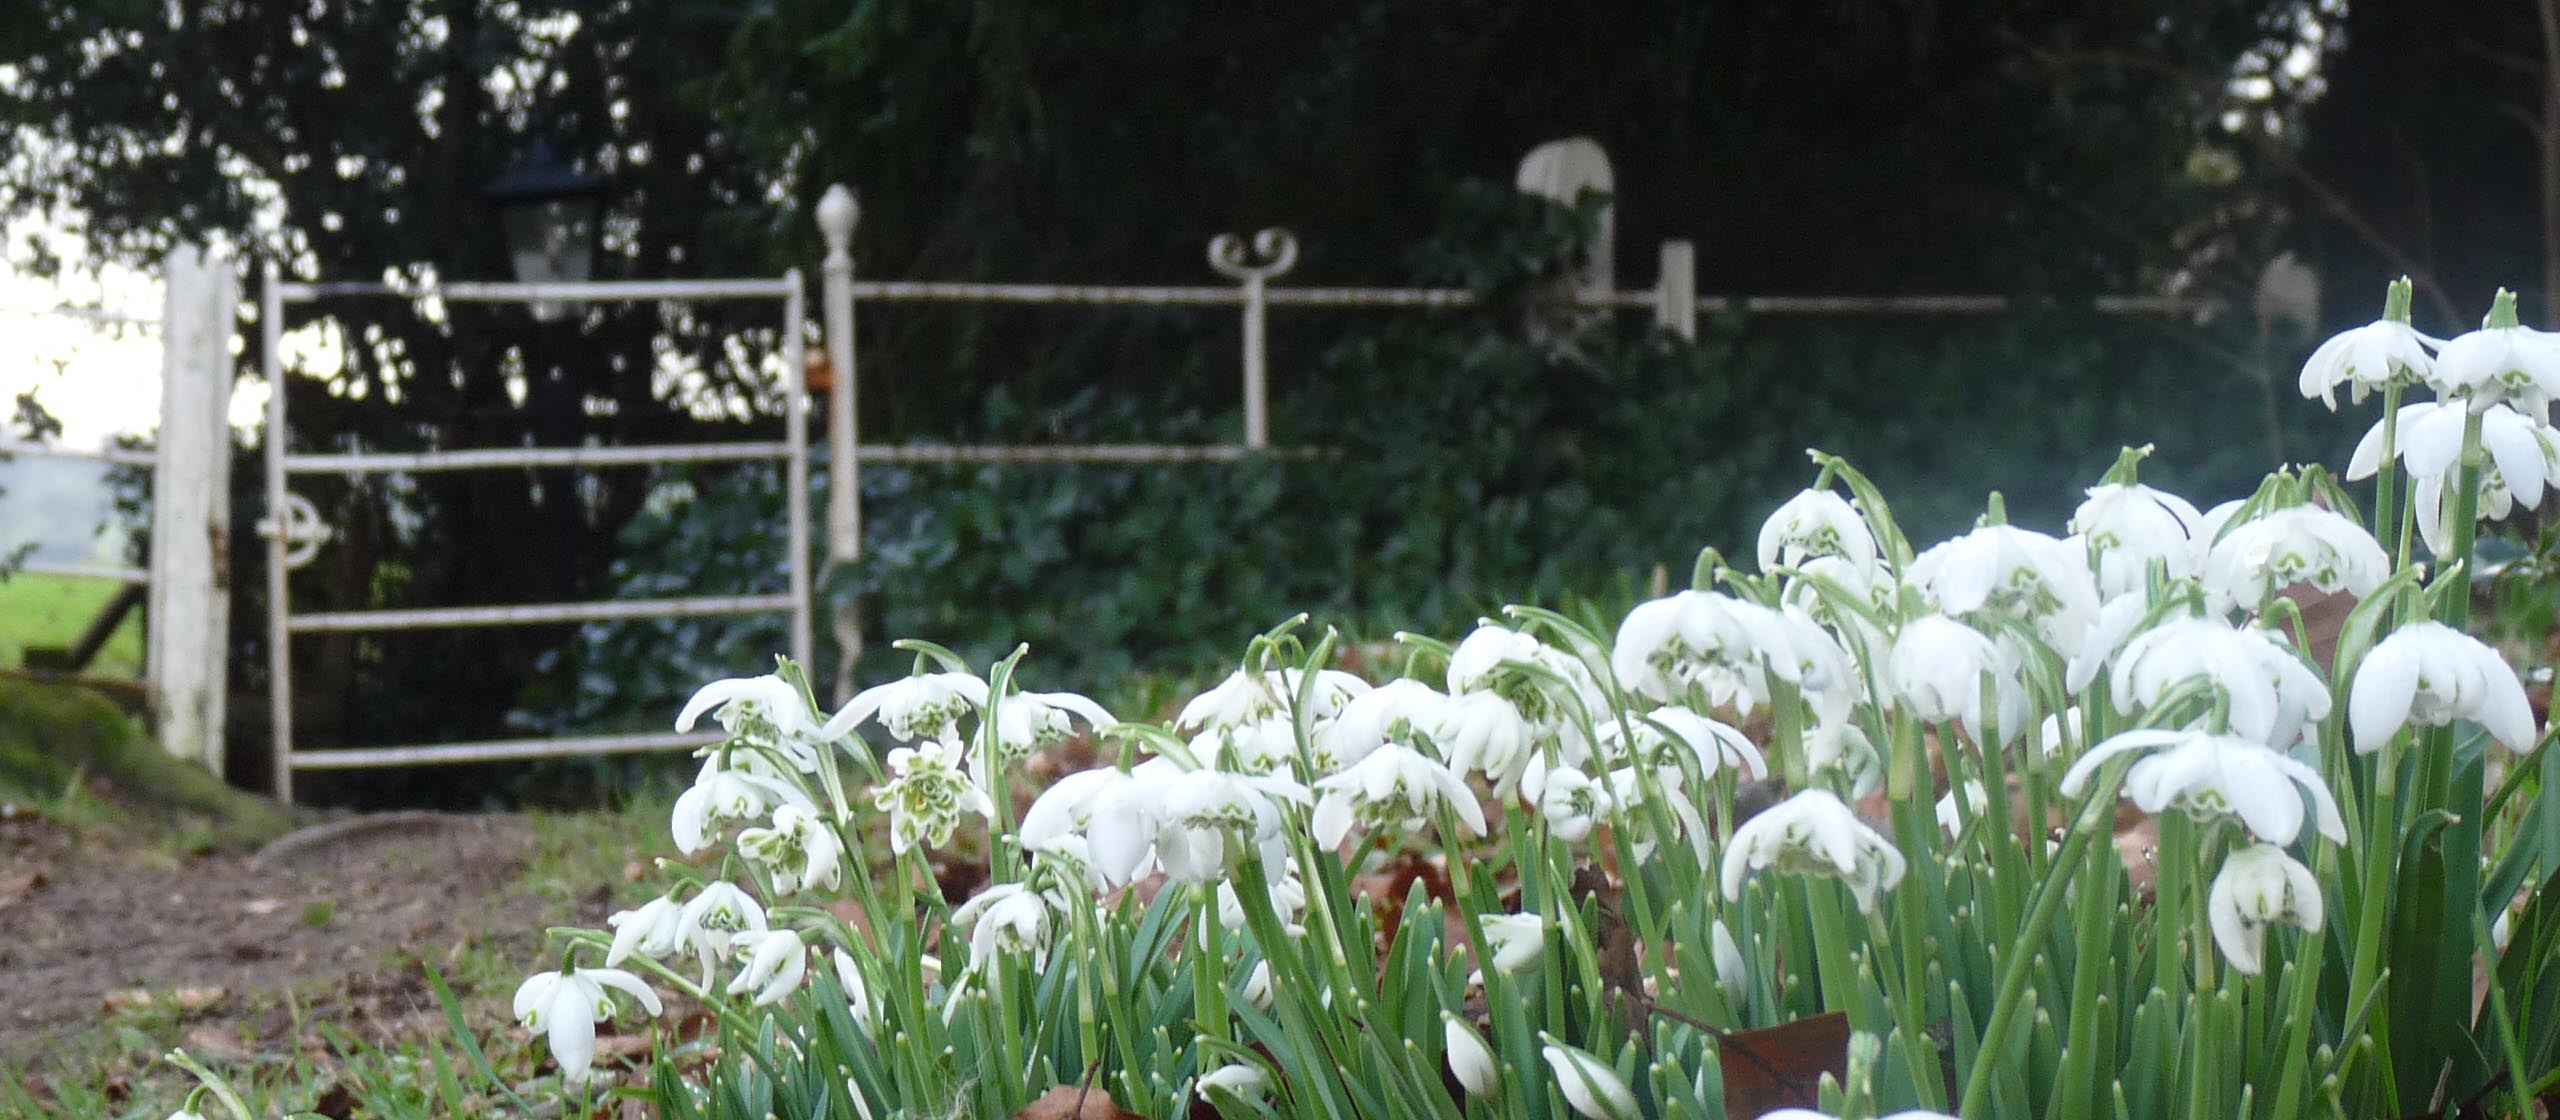 Snowdrops in the Churchyard